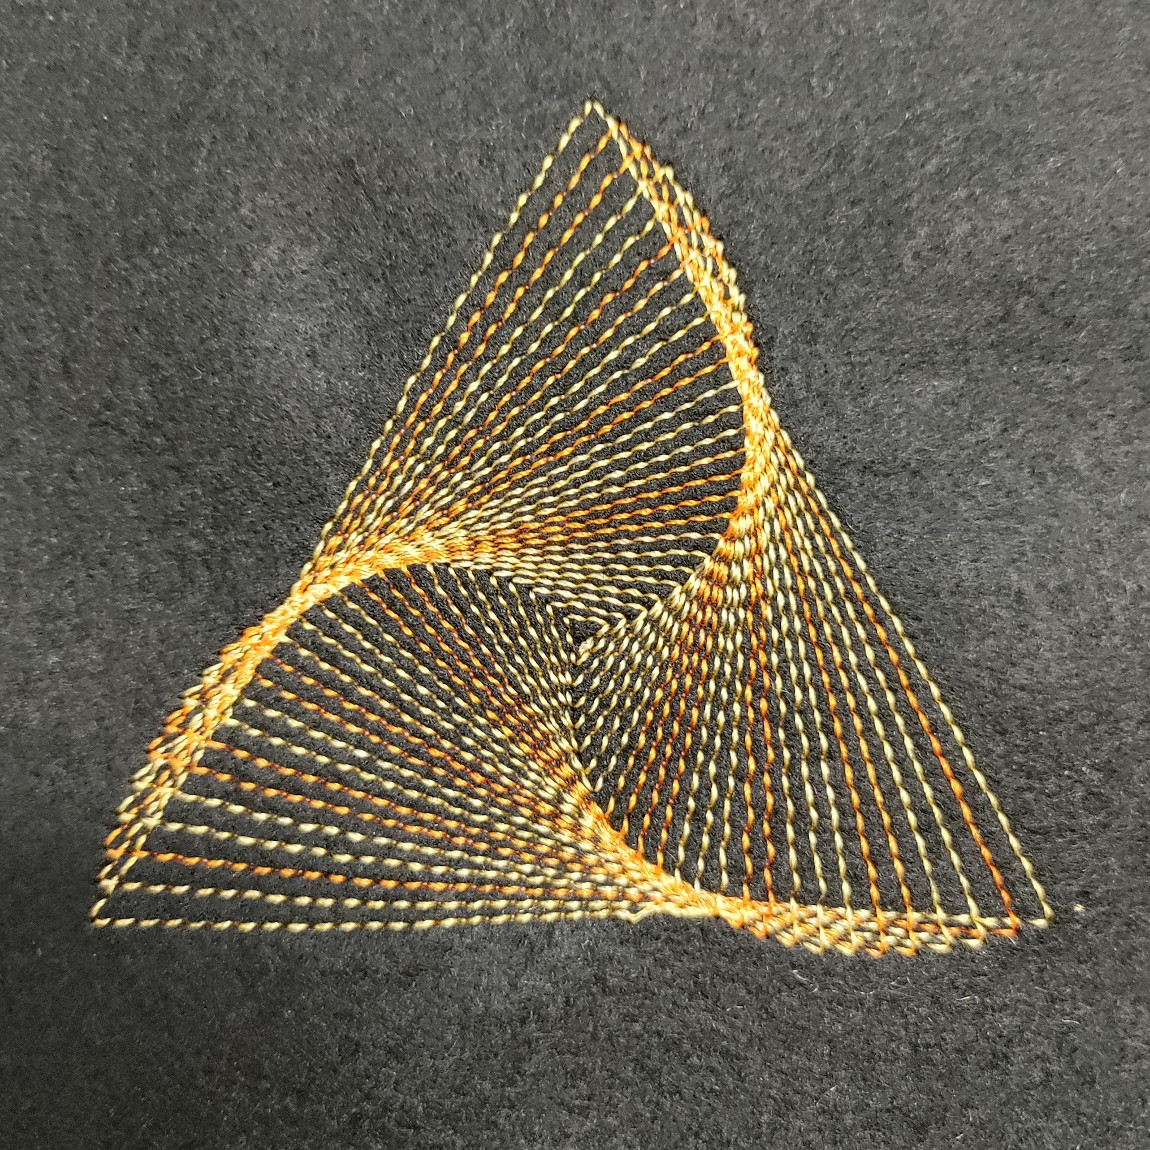 Its a series of triangles getting smaller and rotating slightly to give a swirl effect.  The pattern is stitched with yellow thread on a black background.